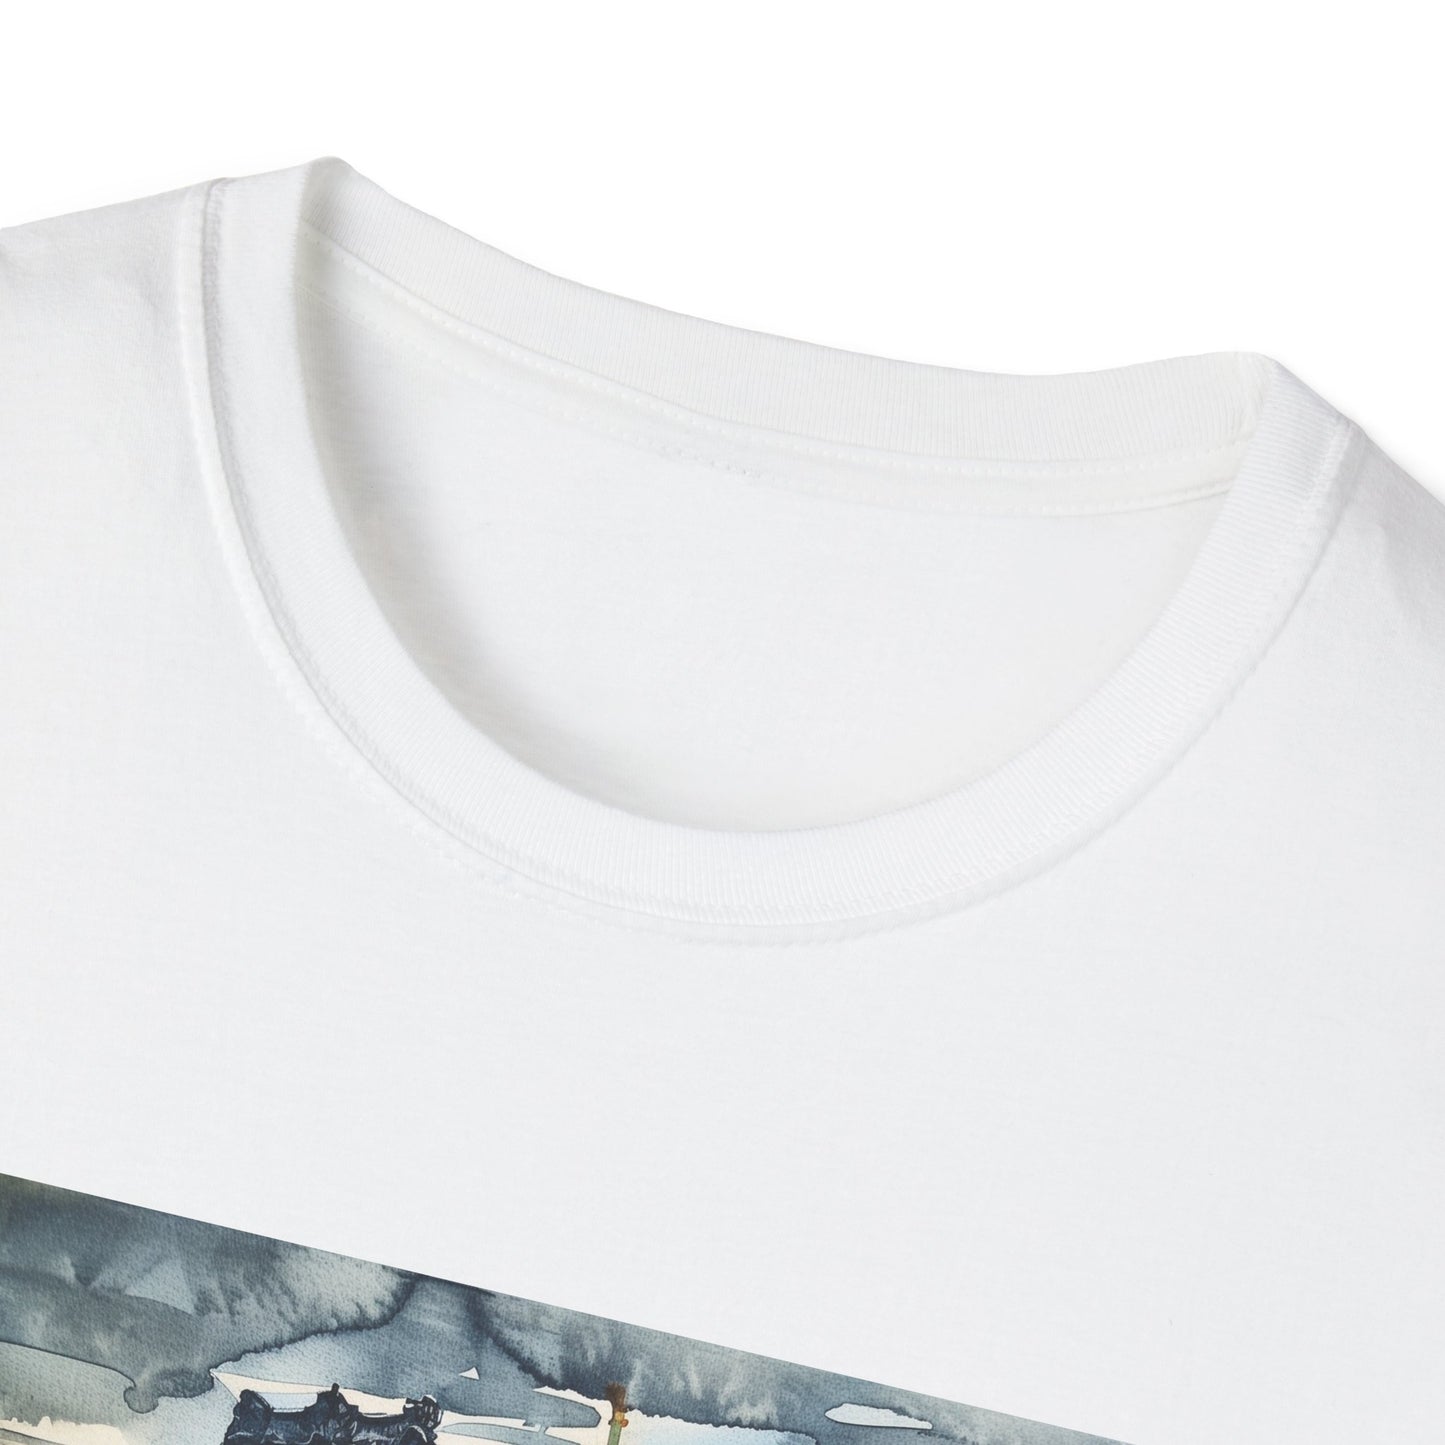 ## The Louvre in Watercolor: A Parisian Dream on a T-shirt